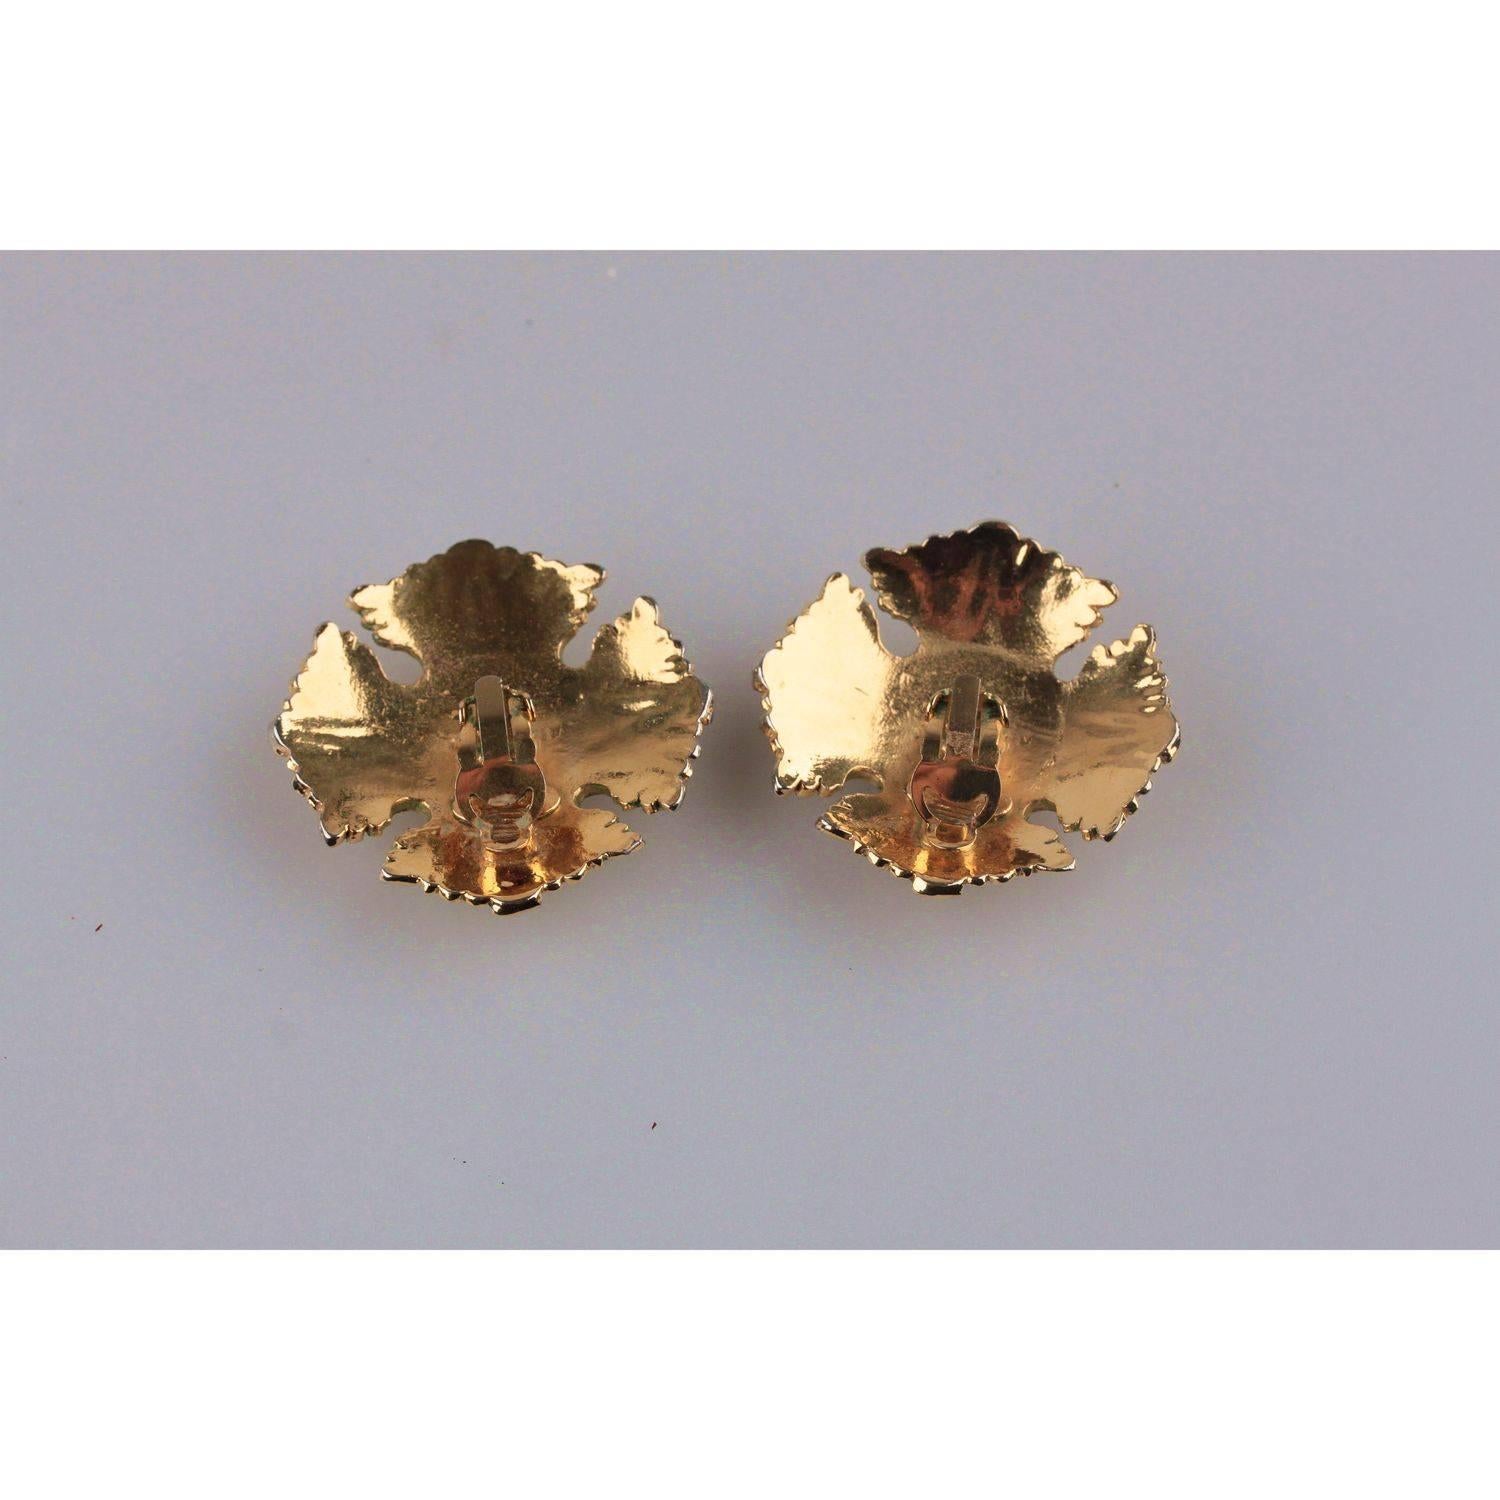 - Clip On Earrings in gold metal by CHANEL
- Signed 'CHANEL 2 CC 3 - Made in France' on the reverse of the earrings
 - Period/ Era: 1986 - 1992 (Victoire de Castellane came to Chanel as Lagerfeld's assistant. Designs from this era are signified by